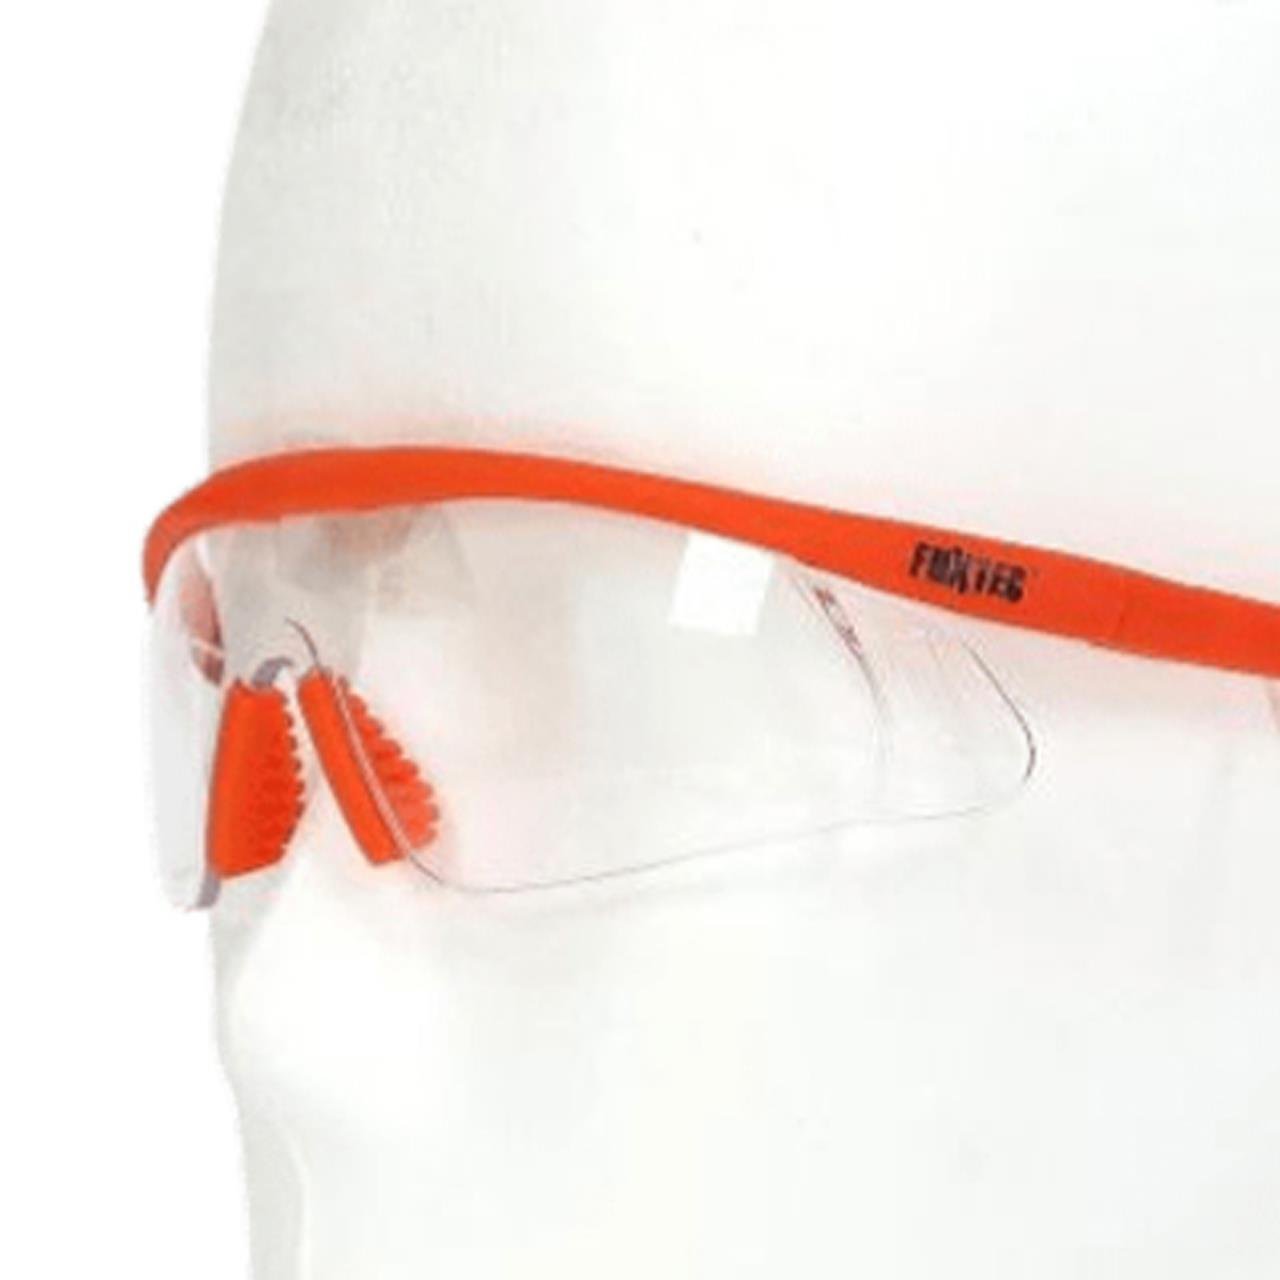 FUXTEC clear safety glasses/goggles